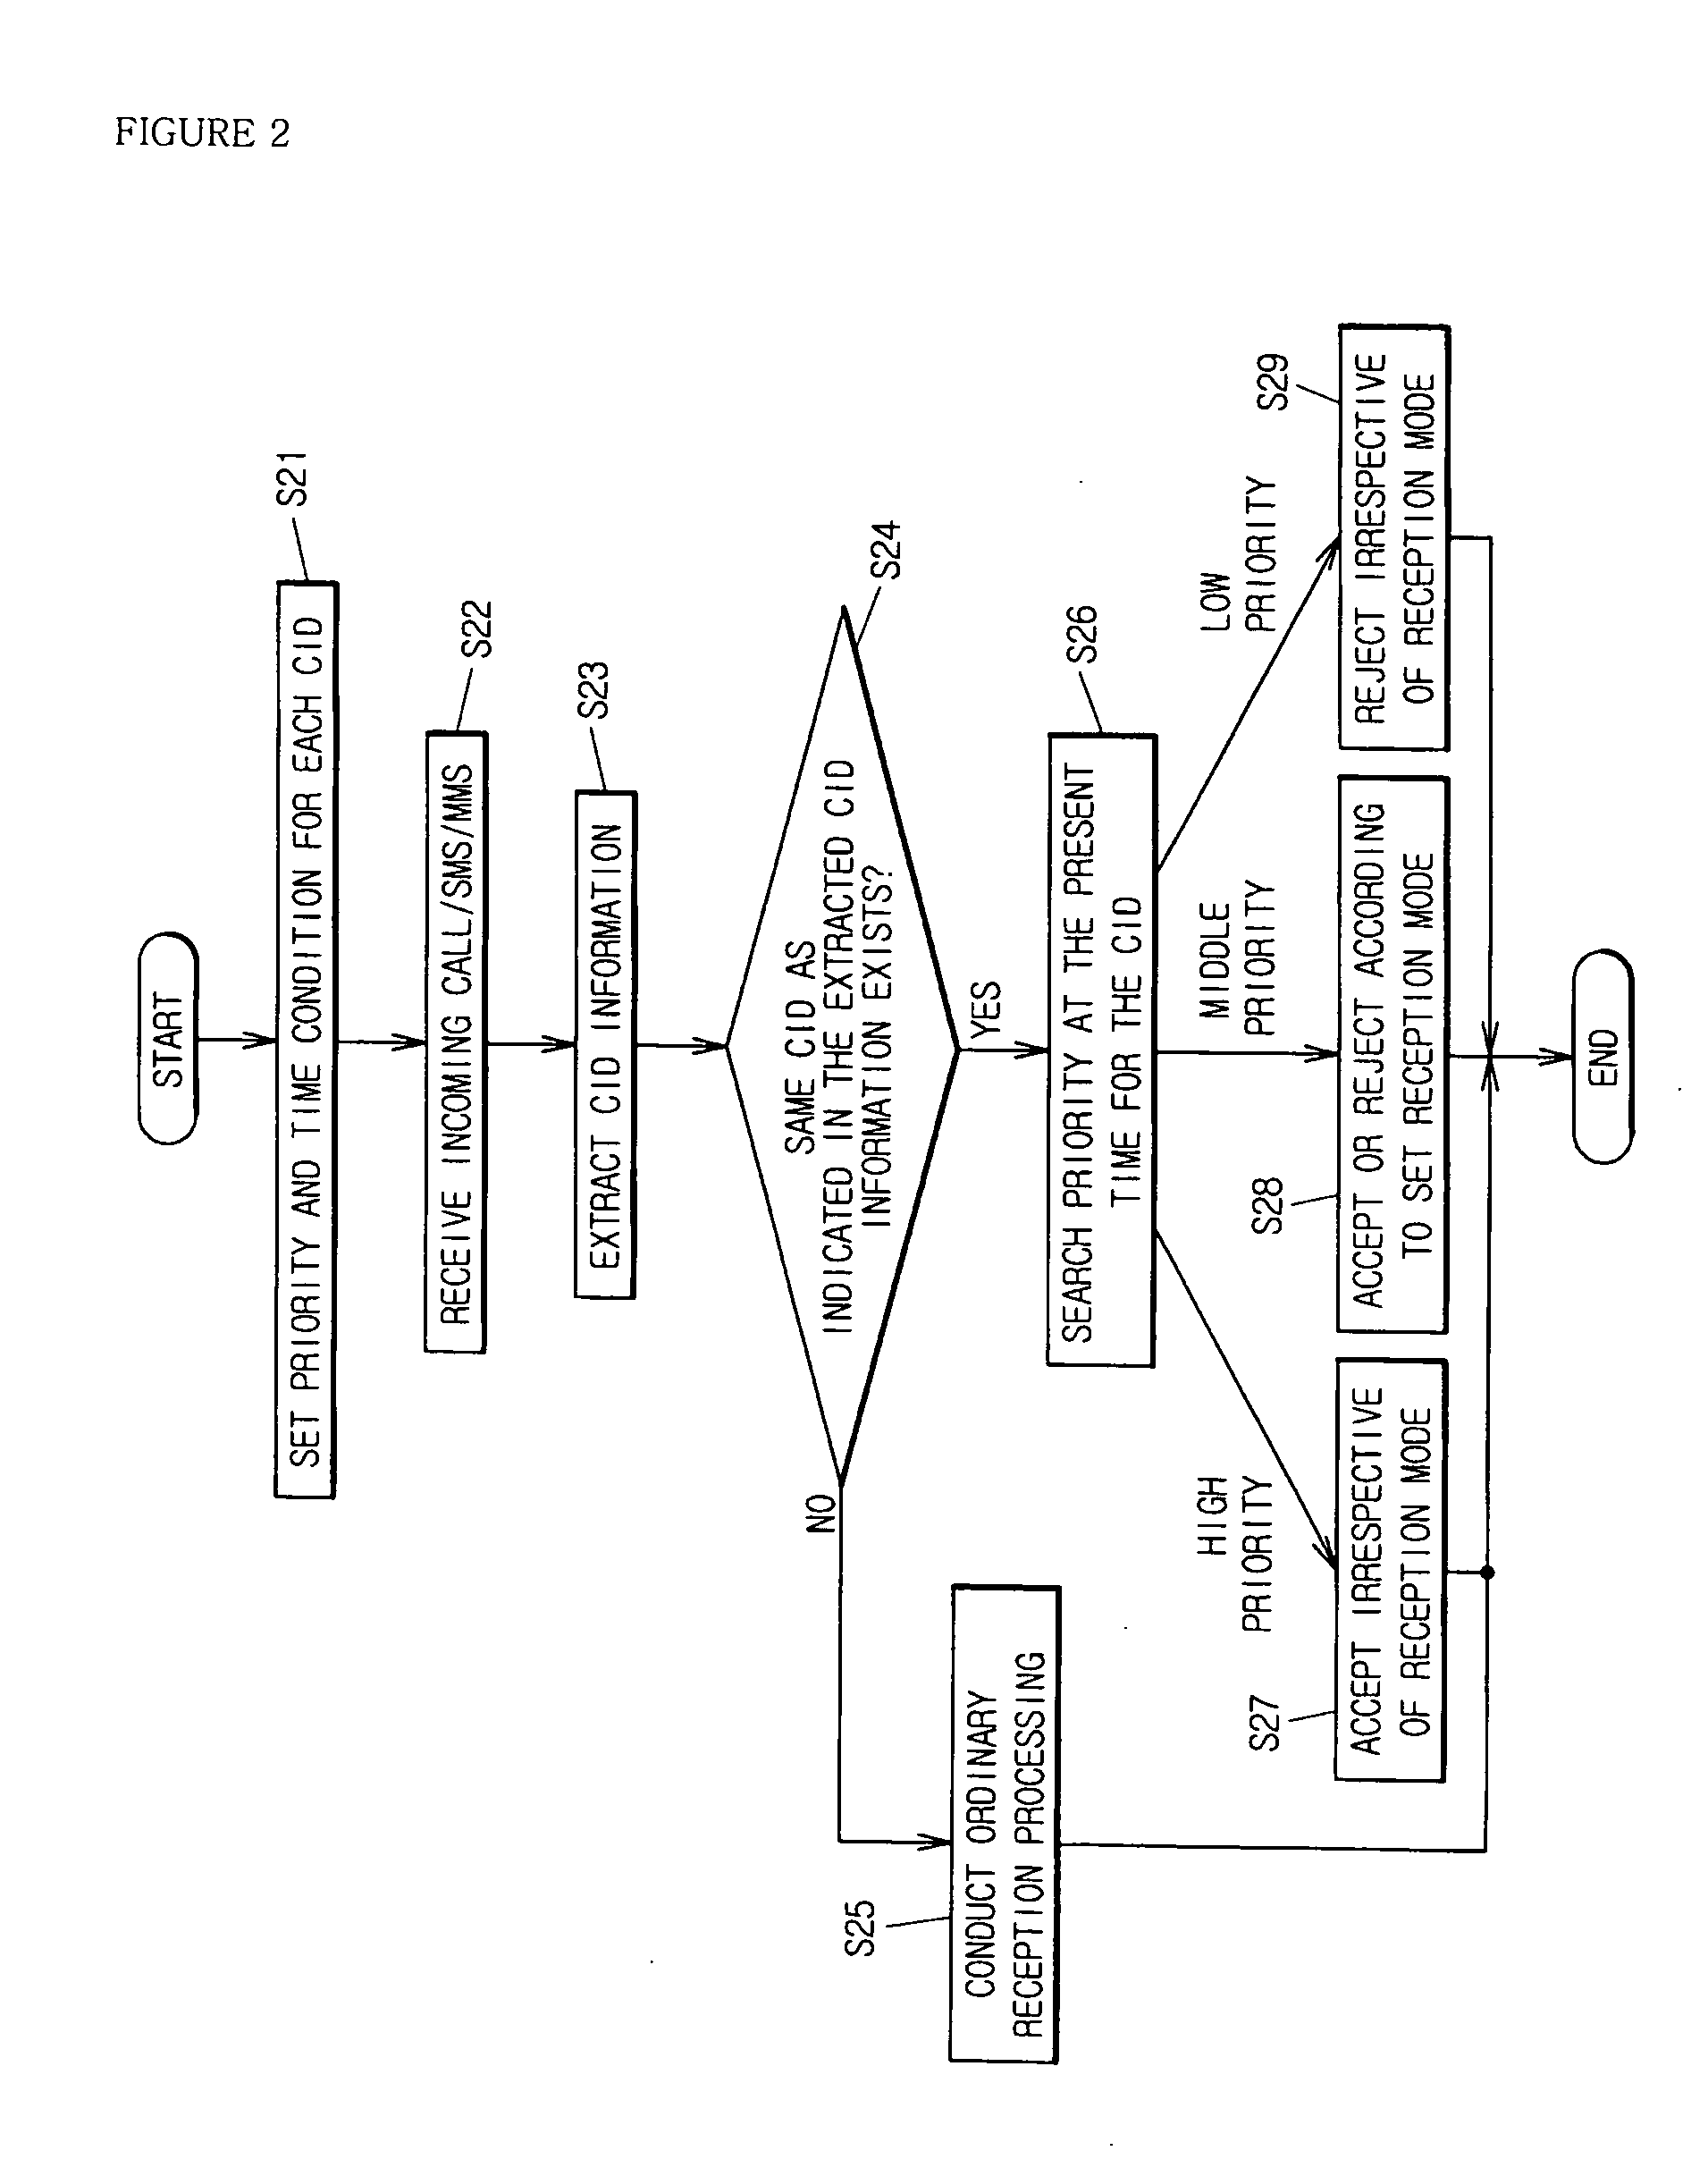 Method for reception and processing of incoming calls and messaging services in a mobile communication terminal based on relevant conditions